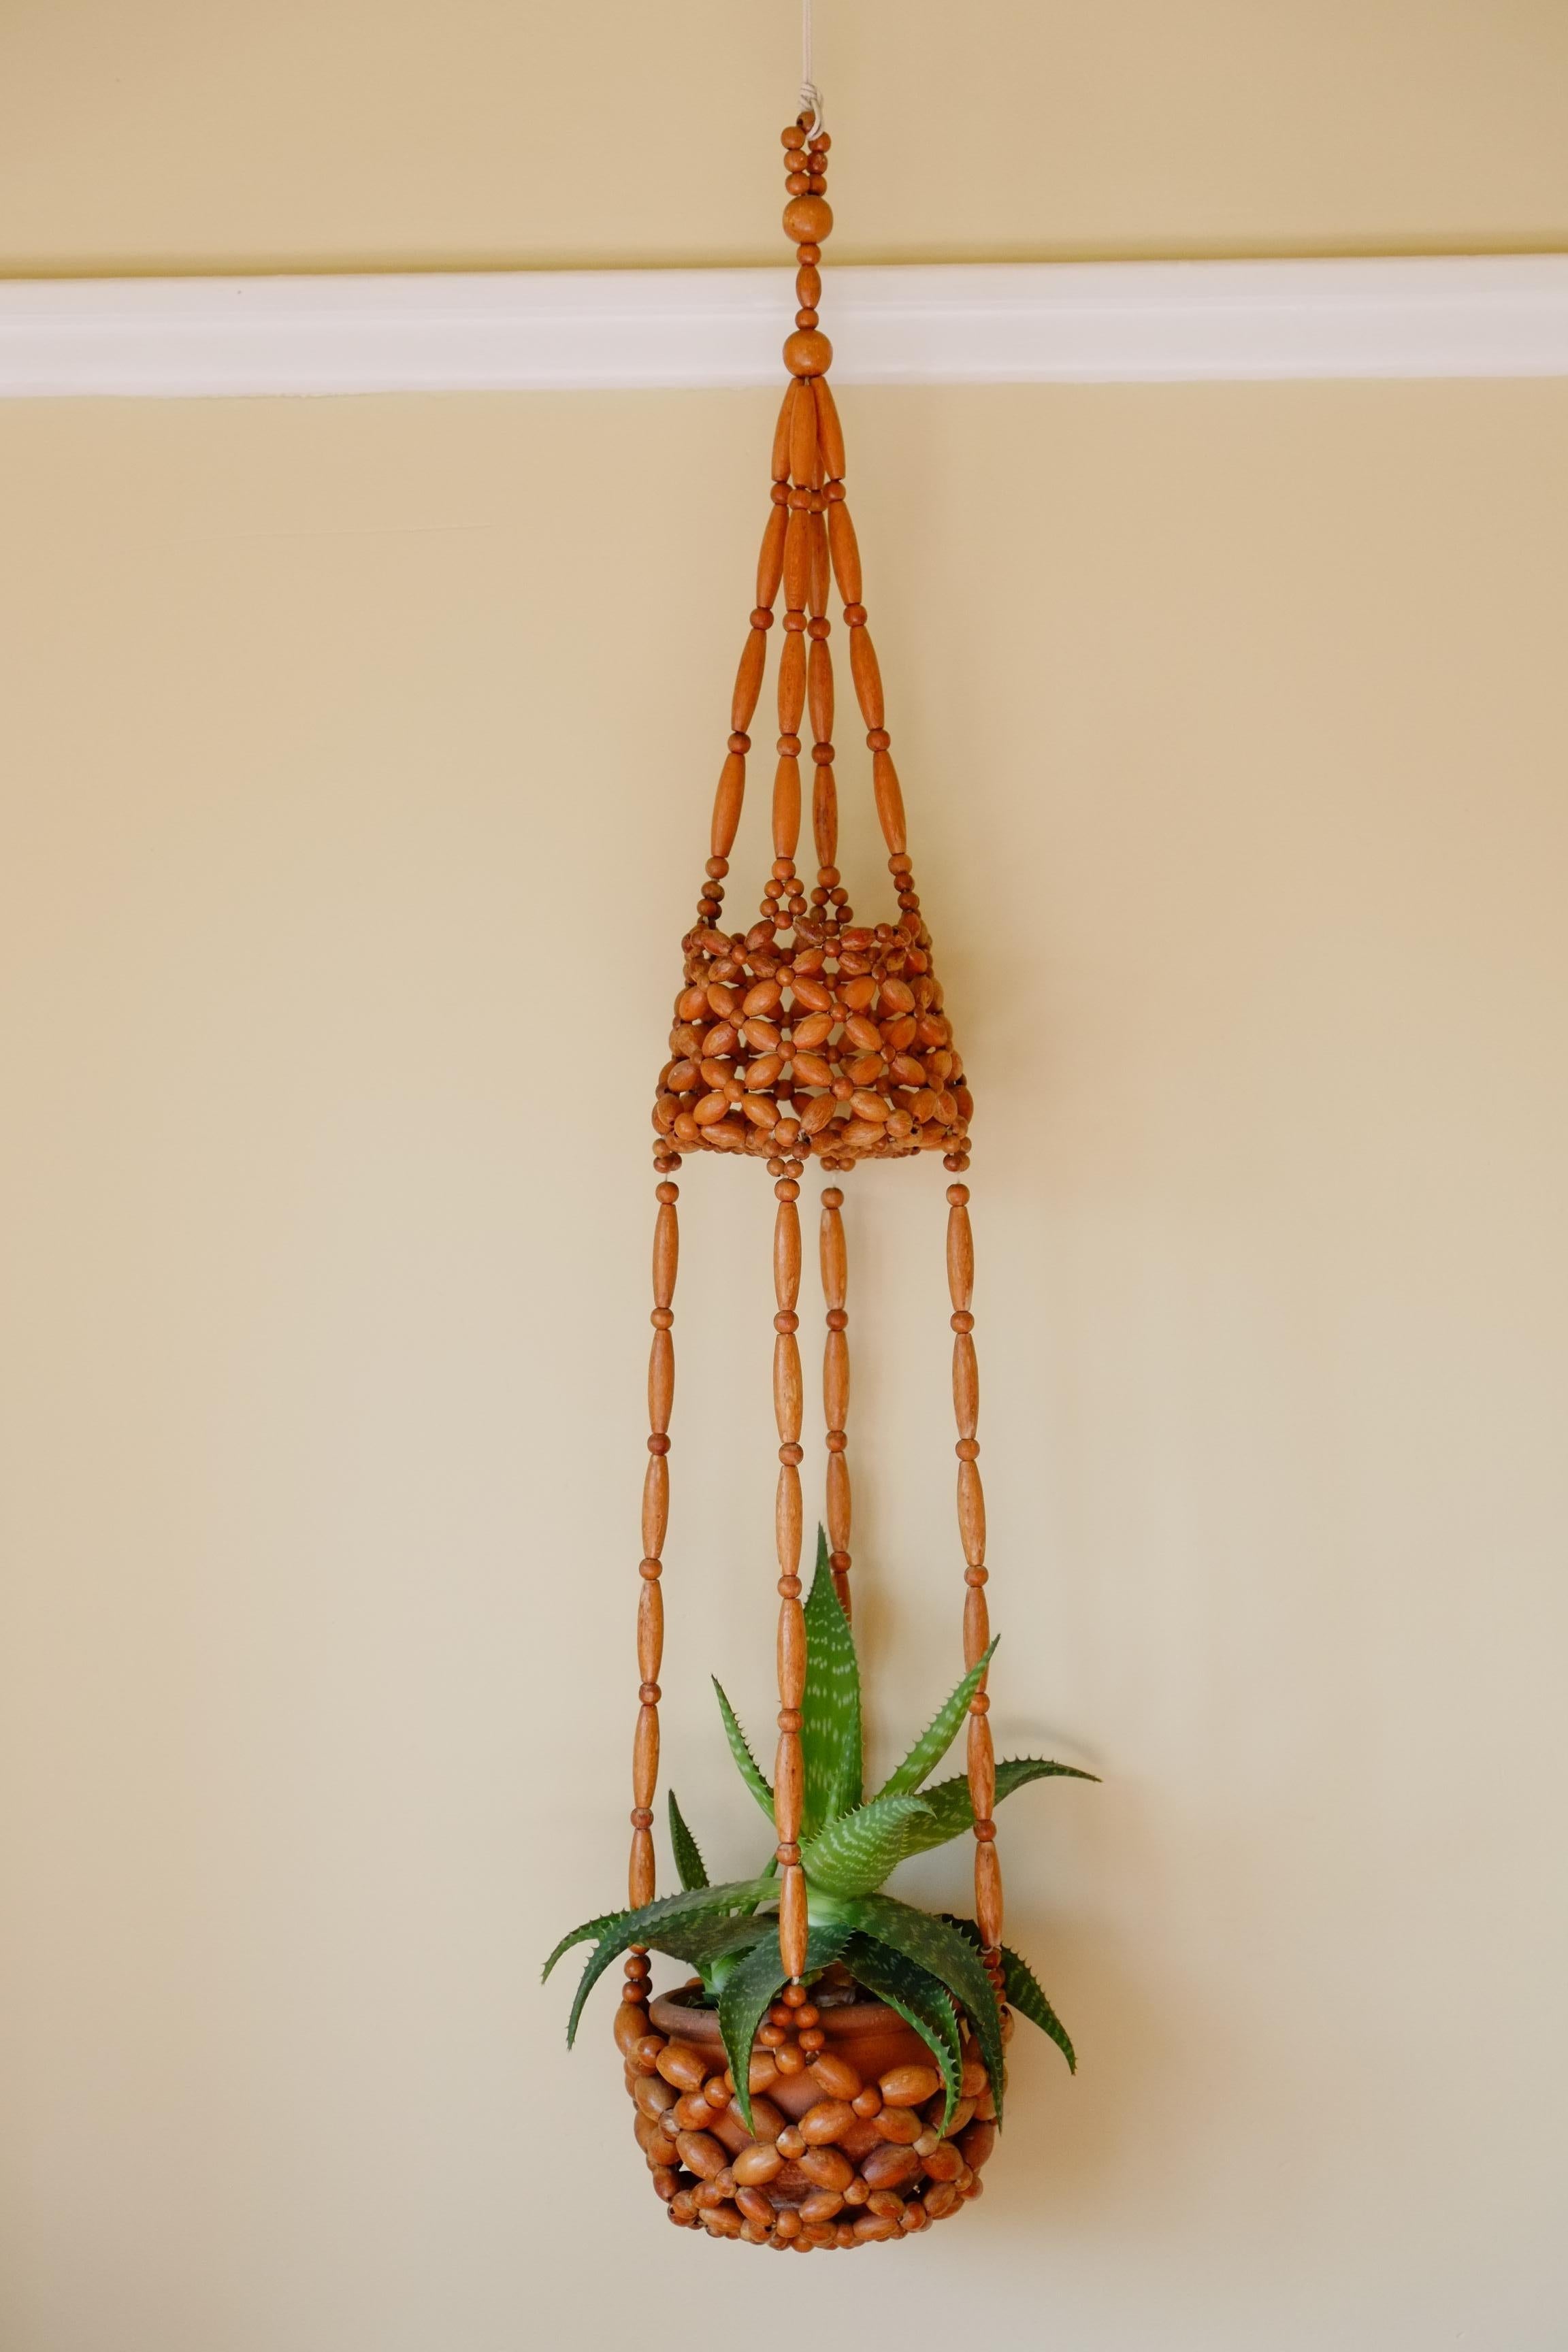 The most beautiful midcentury beaded hanging planter. 

This planter is is great condition and is rare to find intact. Beautiful honey coloured wood beads, strung into a simple flower pattern. Two hanging bowl sections with tapering sides.